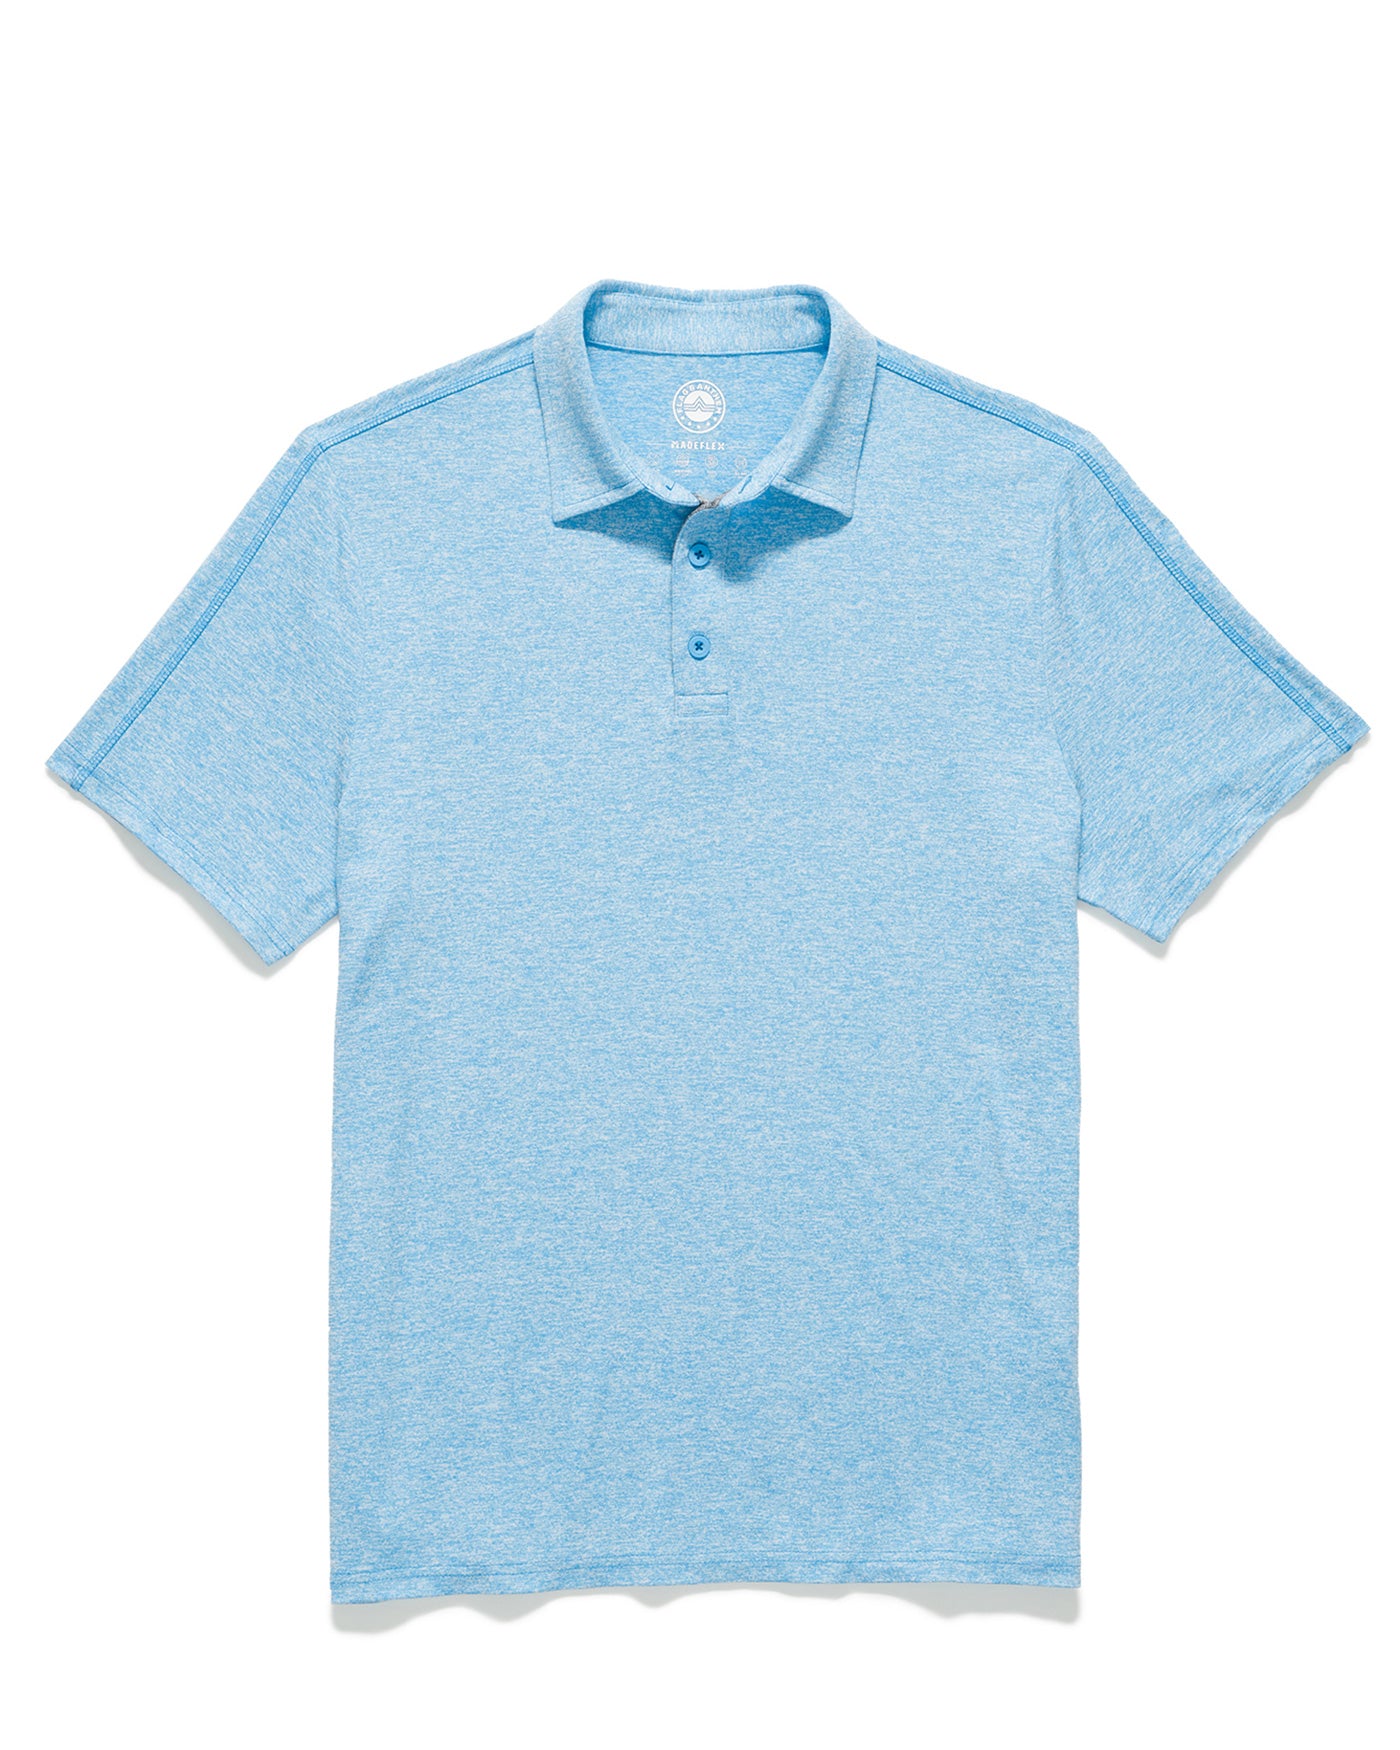 MADEFLEX ALL-DAY PERFORMANCE POLO